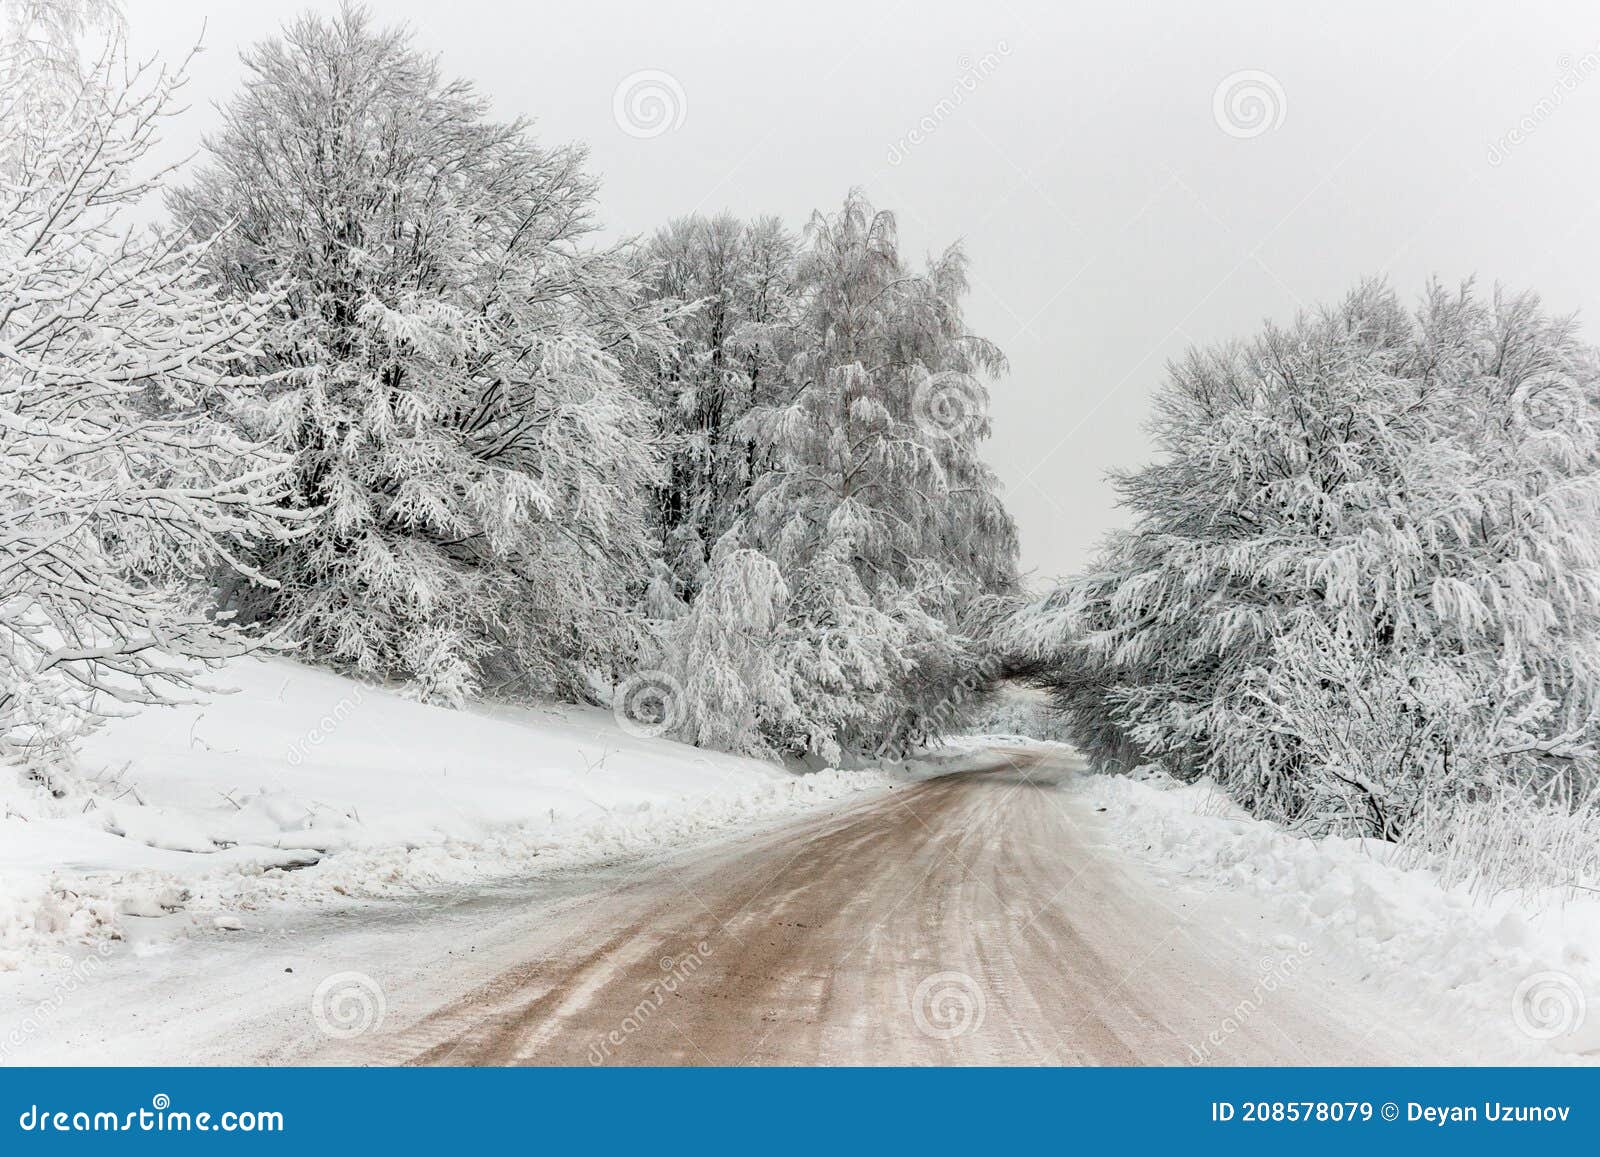 serene winter scenery: snowy mountain road on a cold day